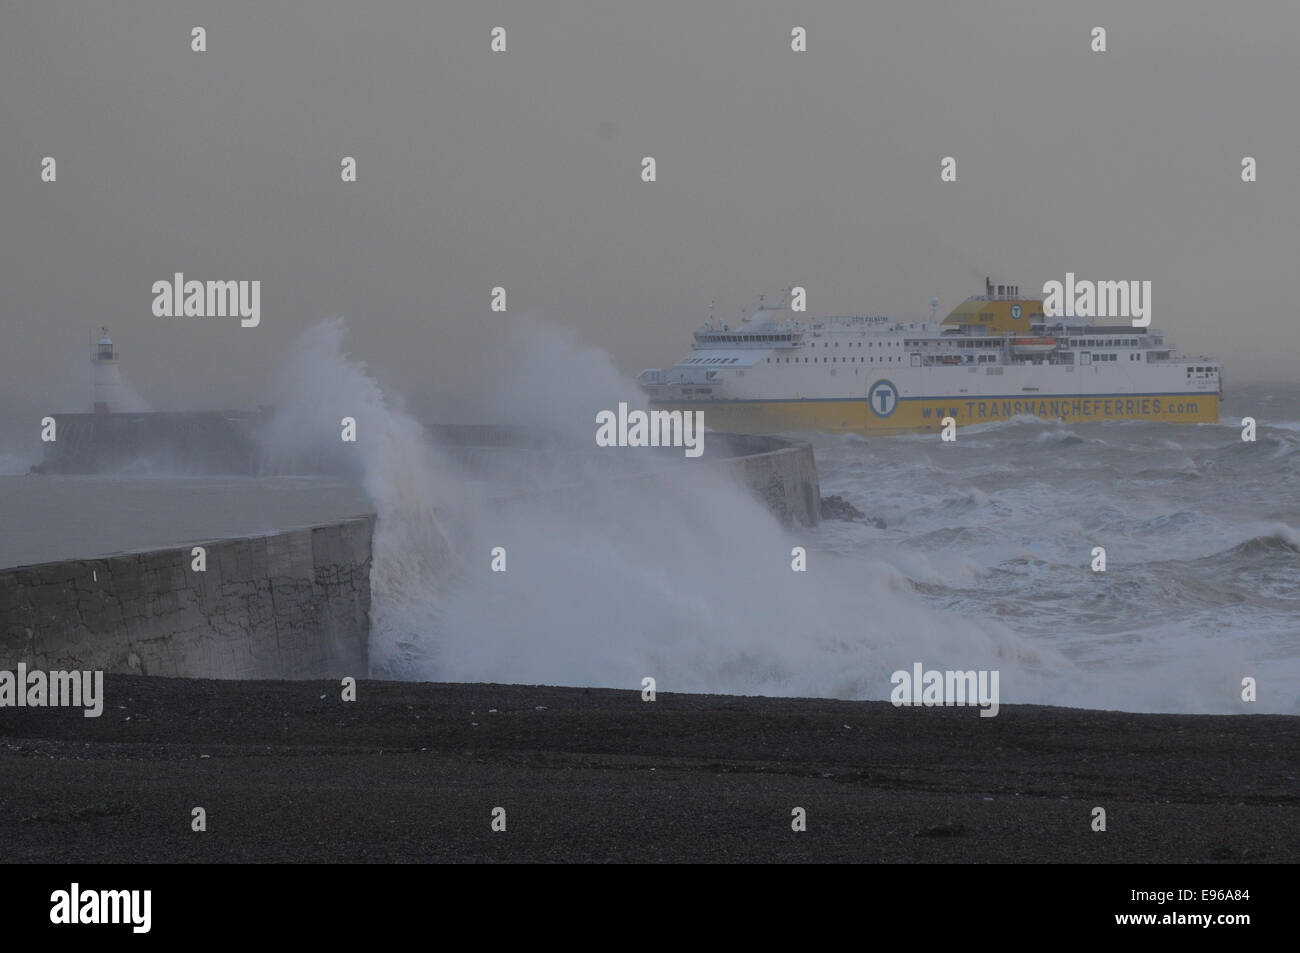 Newhaven, East Sussex, UK. 21 October 2014. Ferry arrives at Newhaven West Arm as remnants of Hurricane Gonzalo whips up the sea off the South Coast. David Burr/Alamy Live News Stock Photo